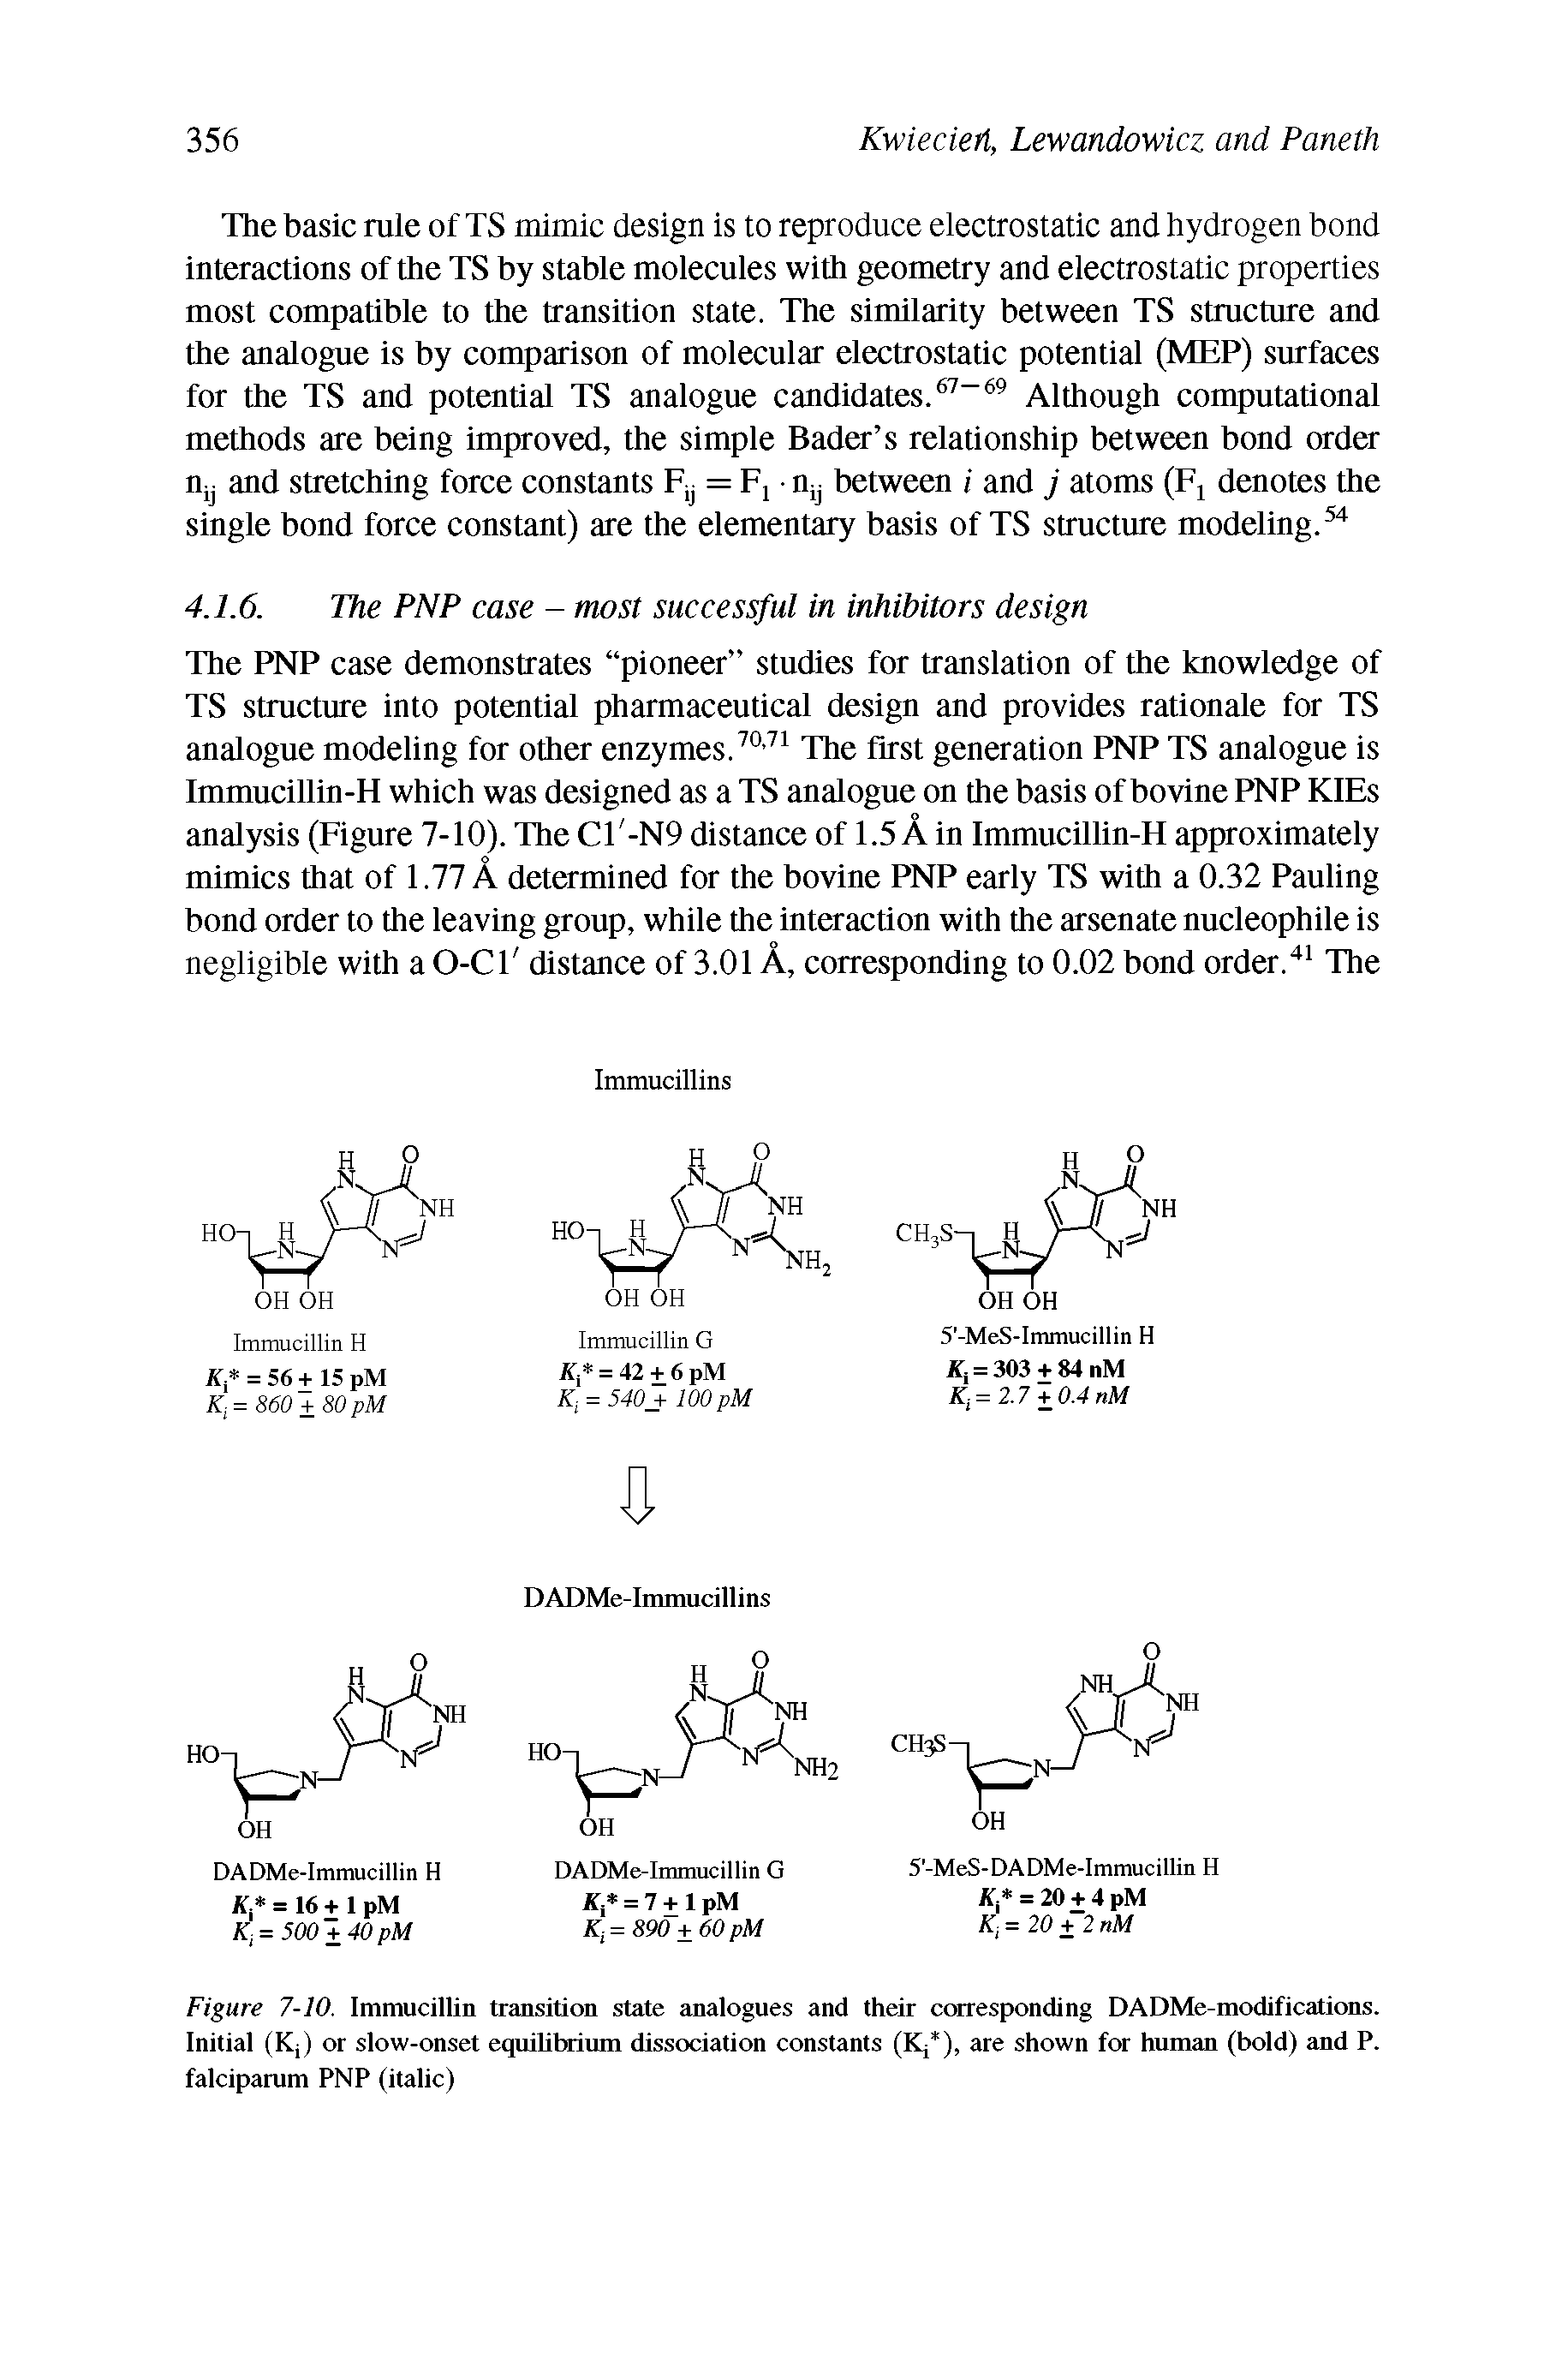 Figure 7-10. Immucillin transition state analogues and their corresponding DADMe-modifications. Initial (Kj) or slow-onset equilibrium dissociation constants (Kj ), are shown for human (bold) and P. falciparum PNP (italic)...